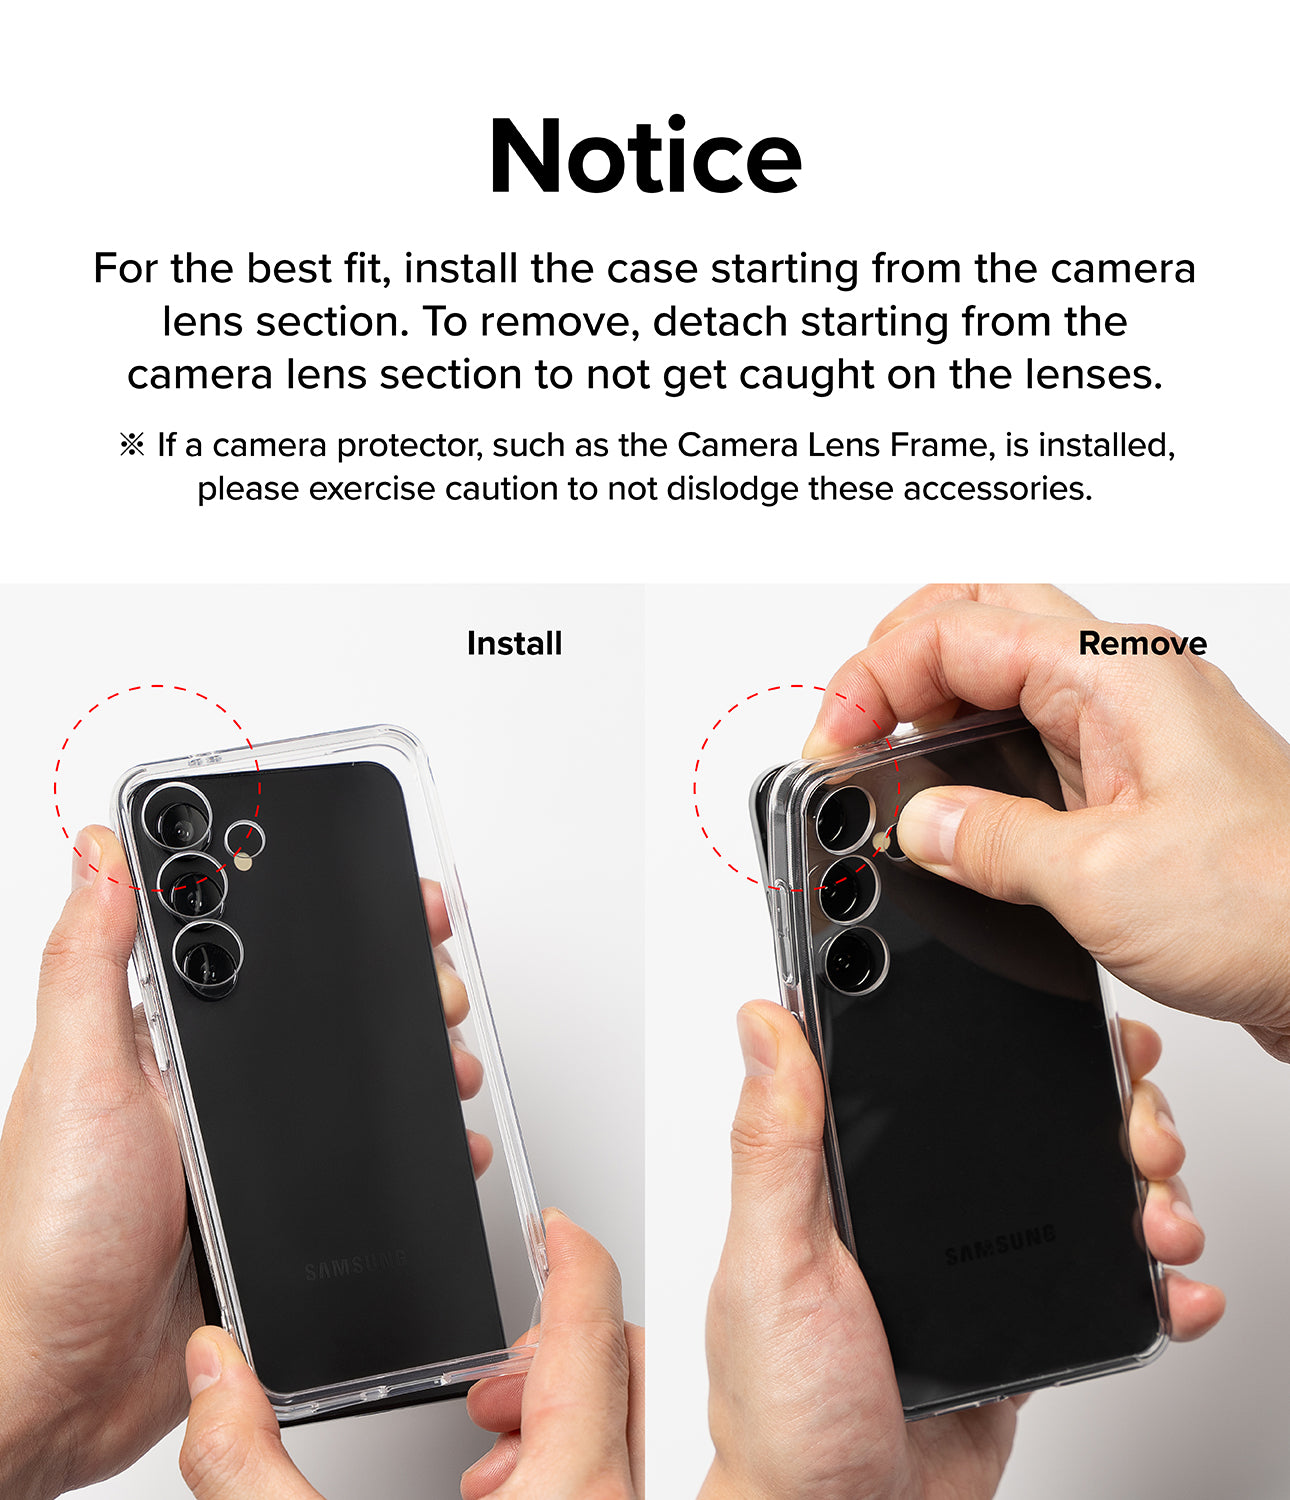 OnePlus 12R Case | Fusion-X Black - Notice. For the best fit, install the case starting from the camera lens section. To remove, detach starting from the camera lens section to not get caught on the lenses.